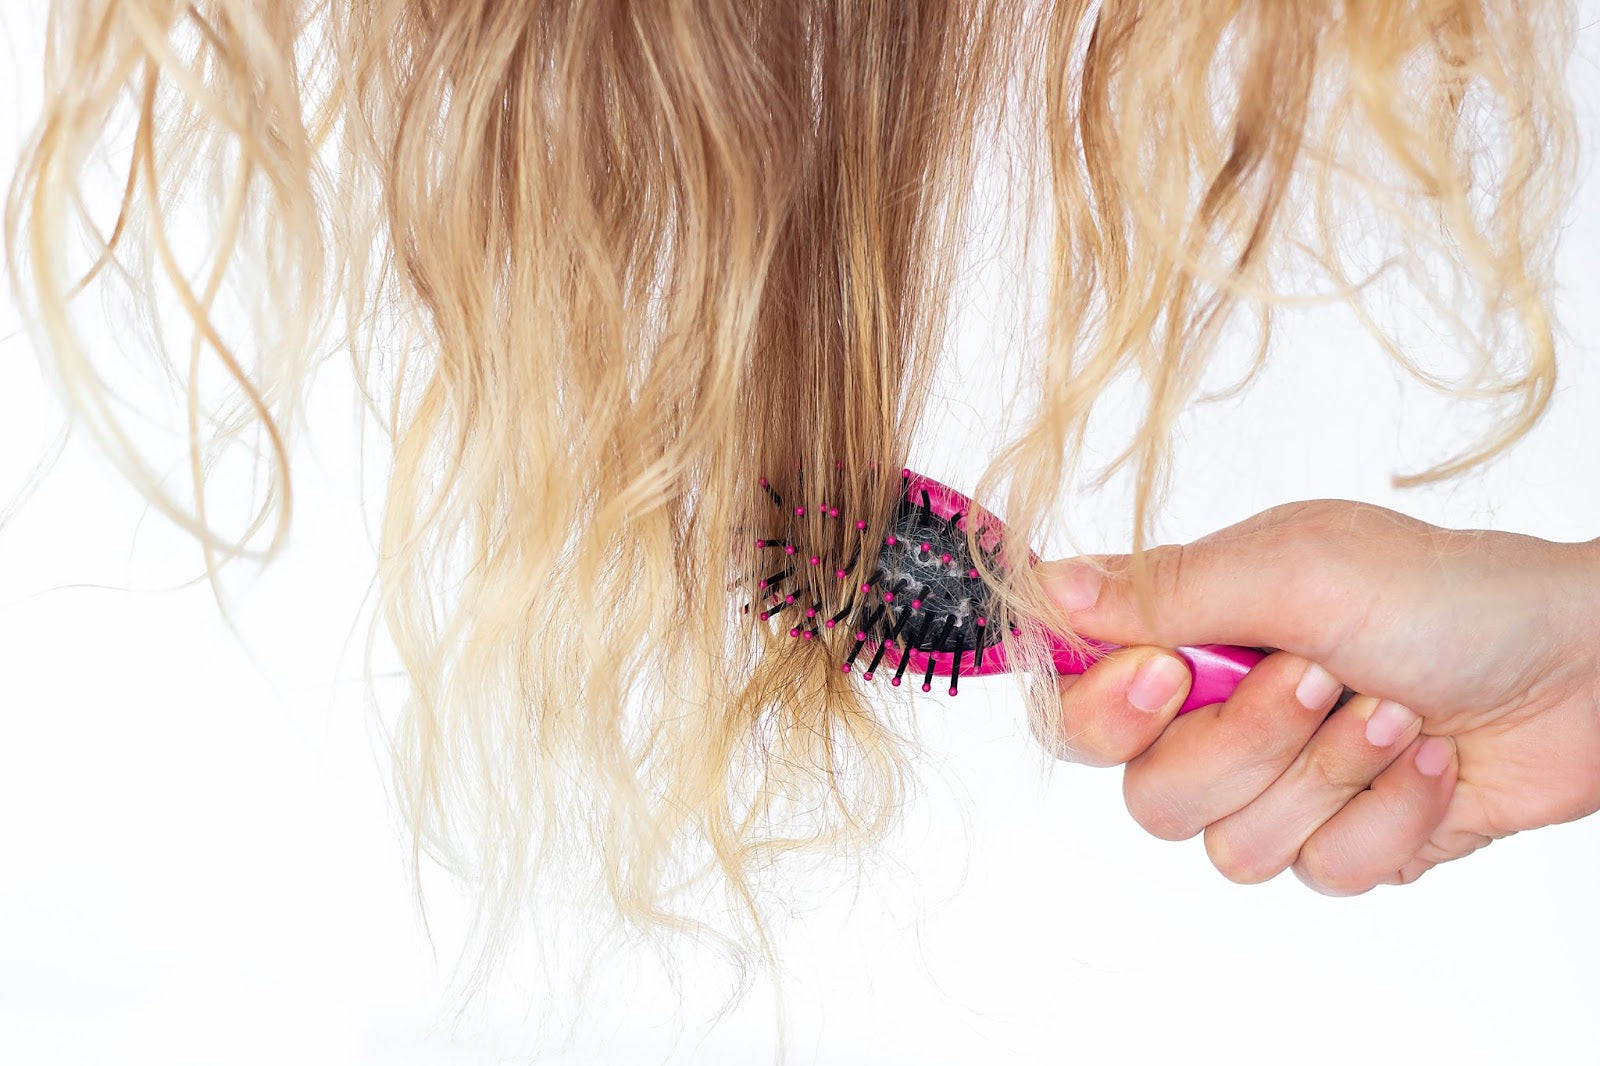 7 Key Tips to Help Rebuild and Prevent Damaged Hair